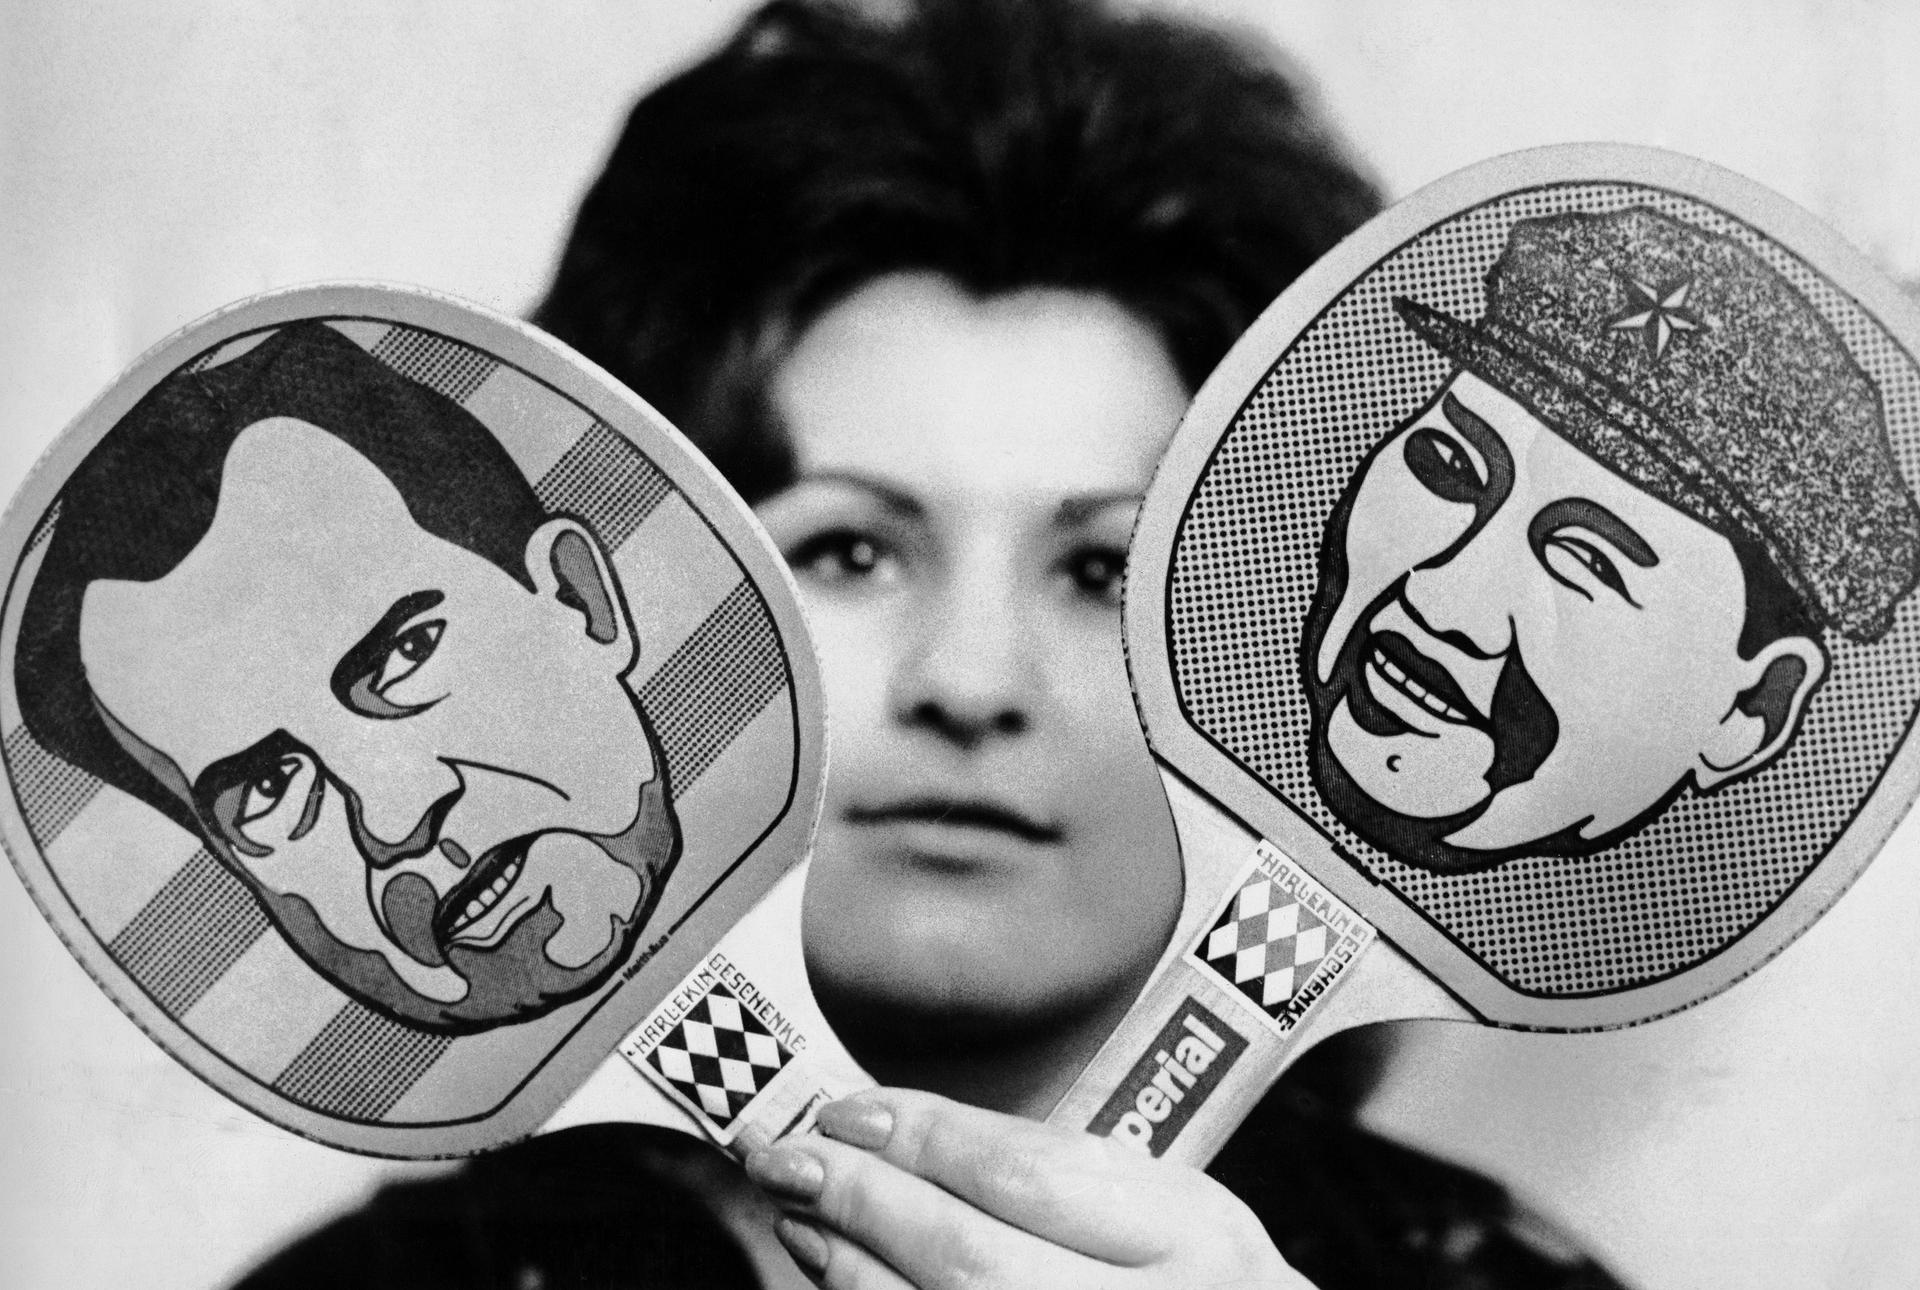 Pingpong paddles features faces of Richard Nixon and Chinese Chairman Mao Tse-tung